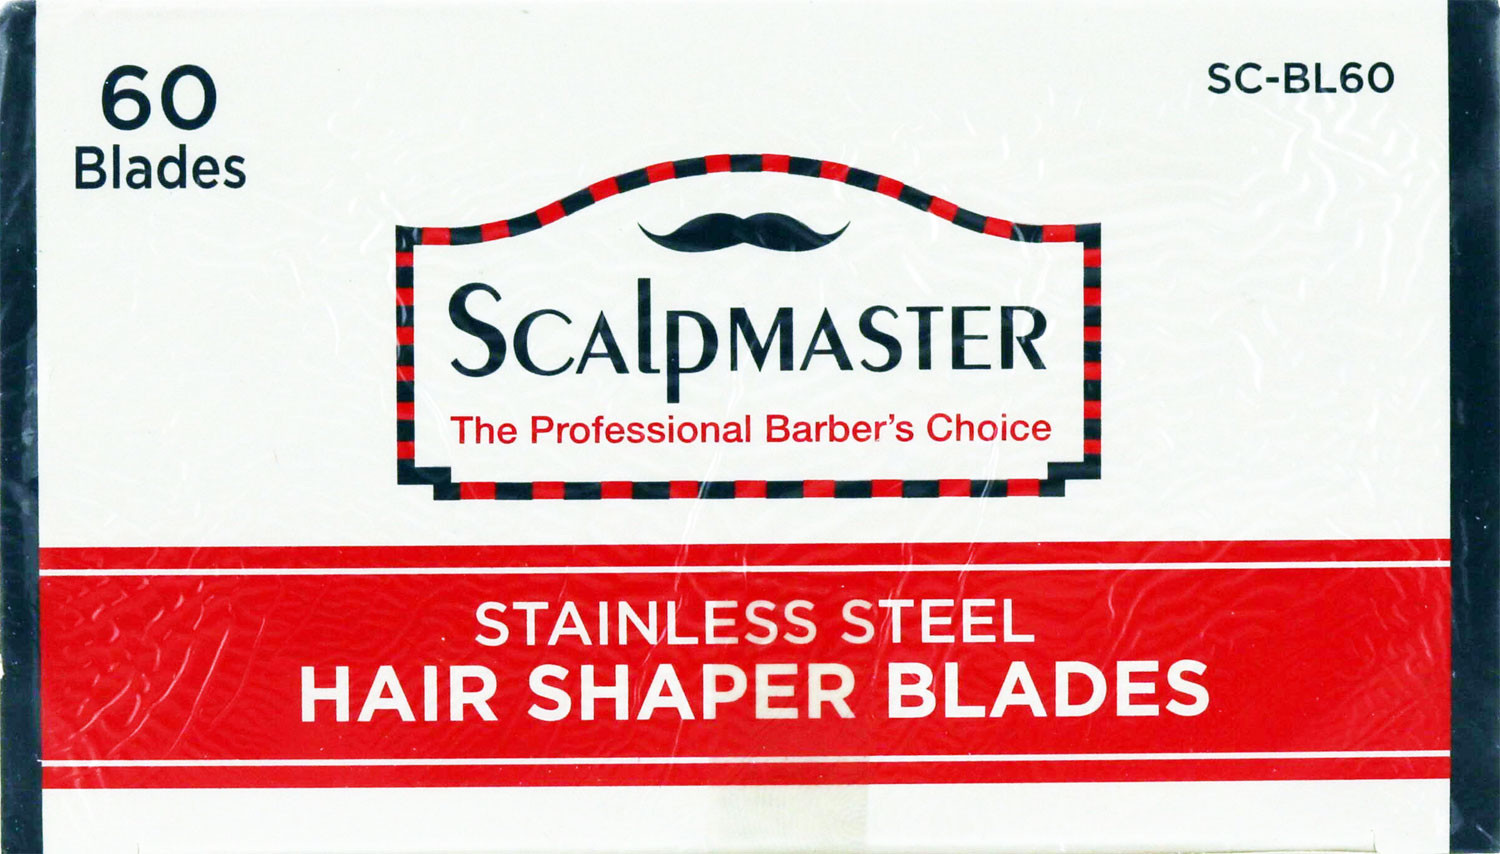 Stainless Steel Shaper Blades by Scalpmaster